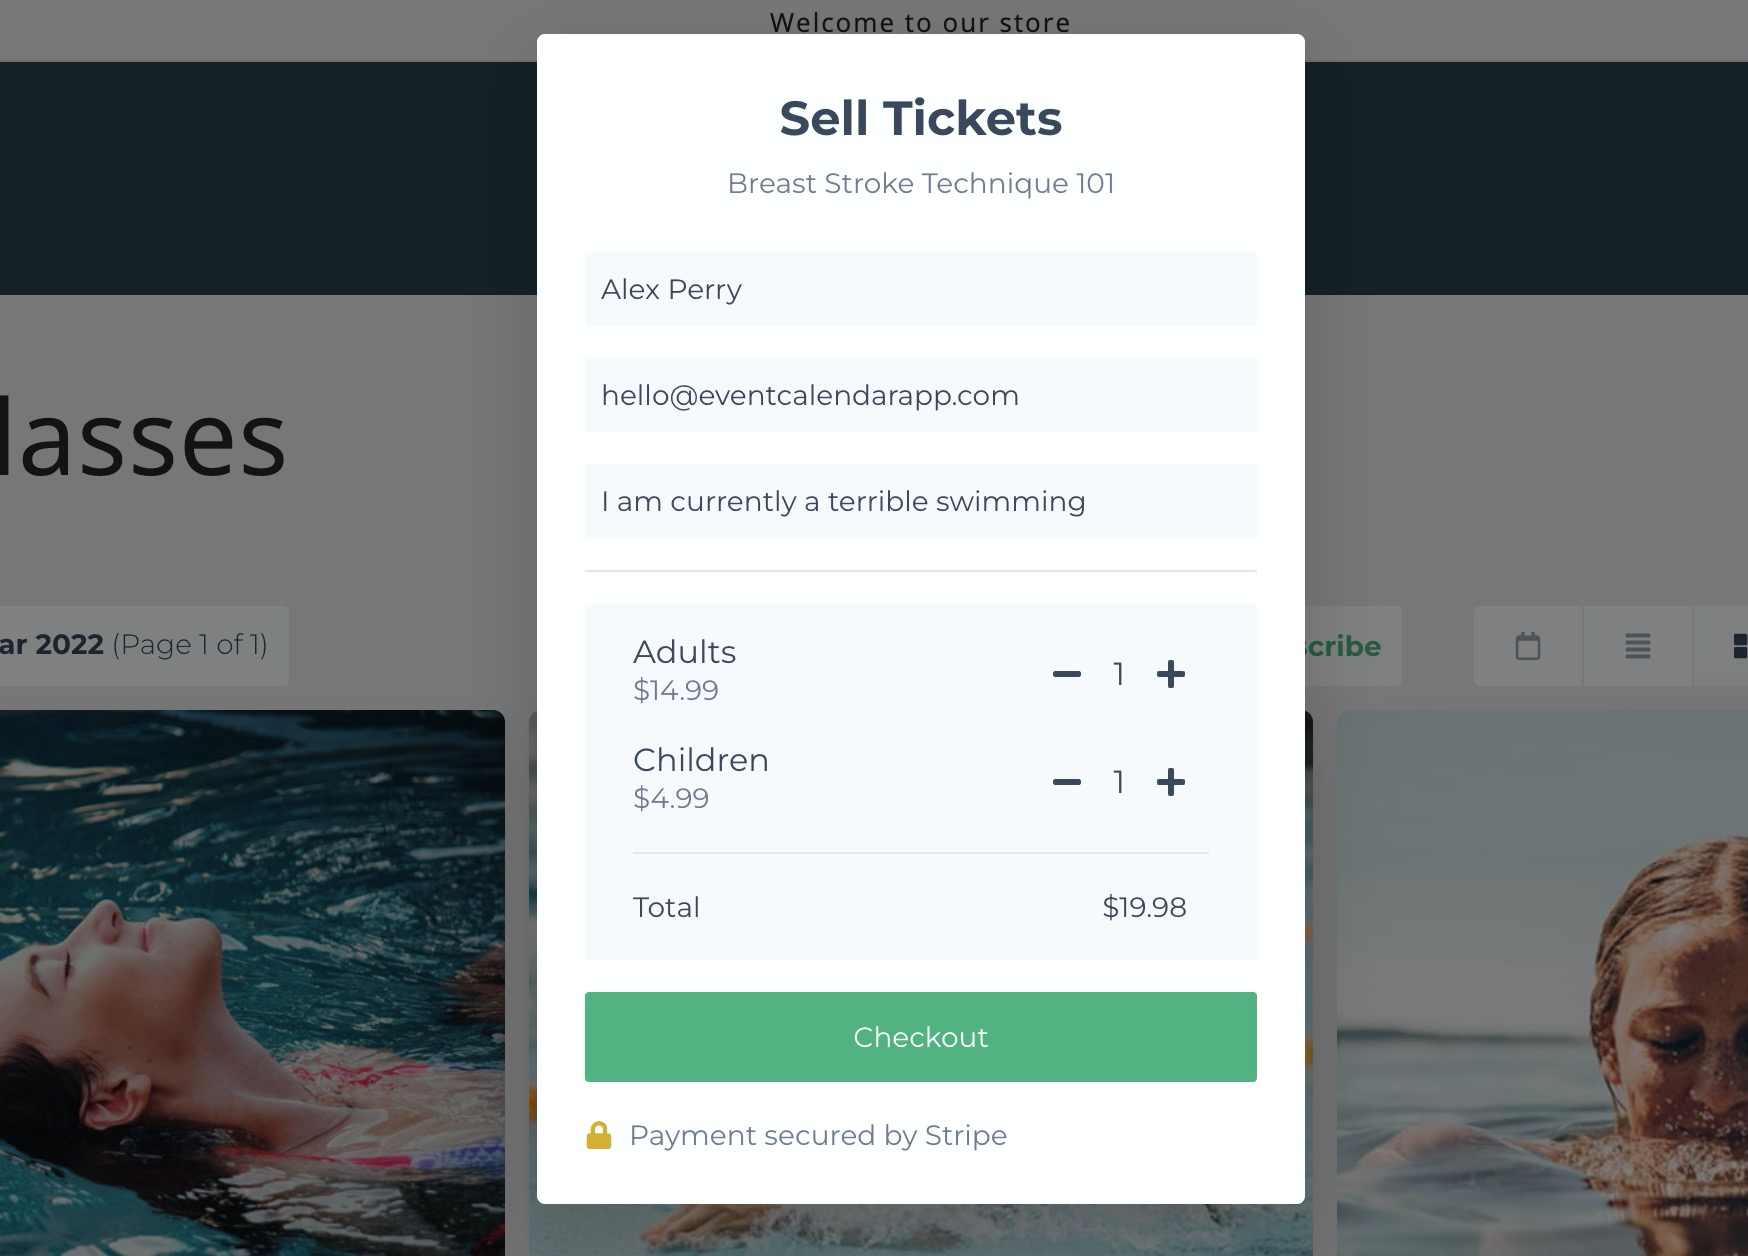 How to sell tickets on Shopify